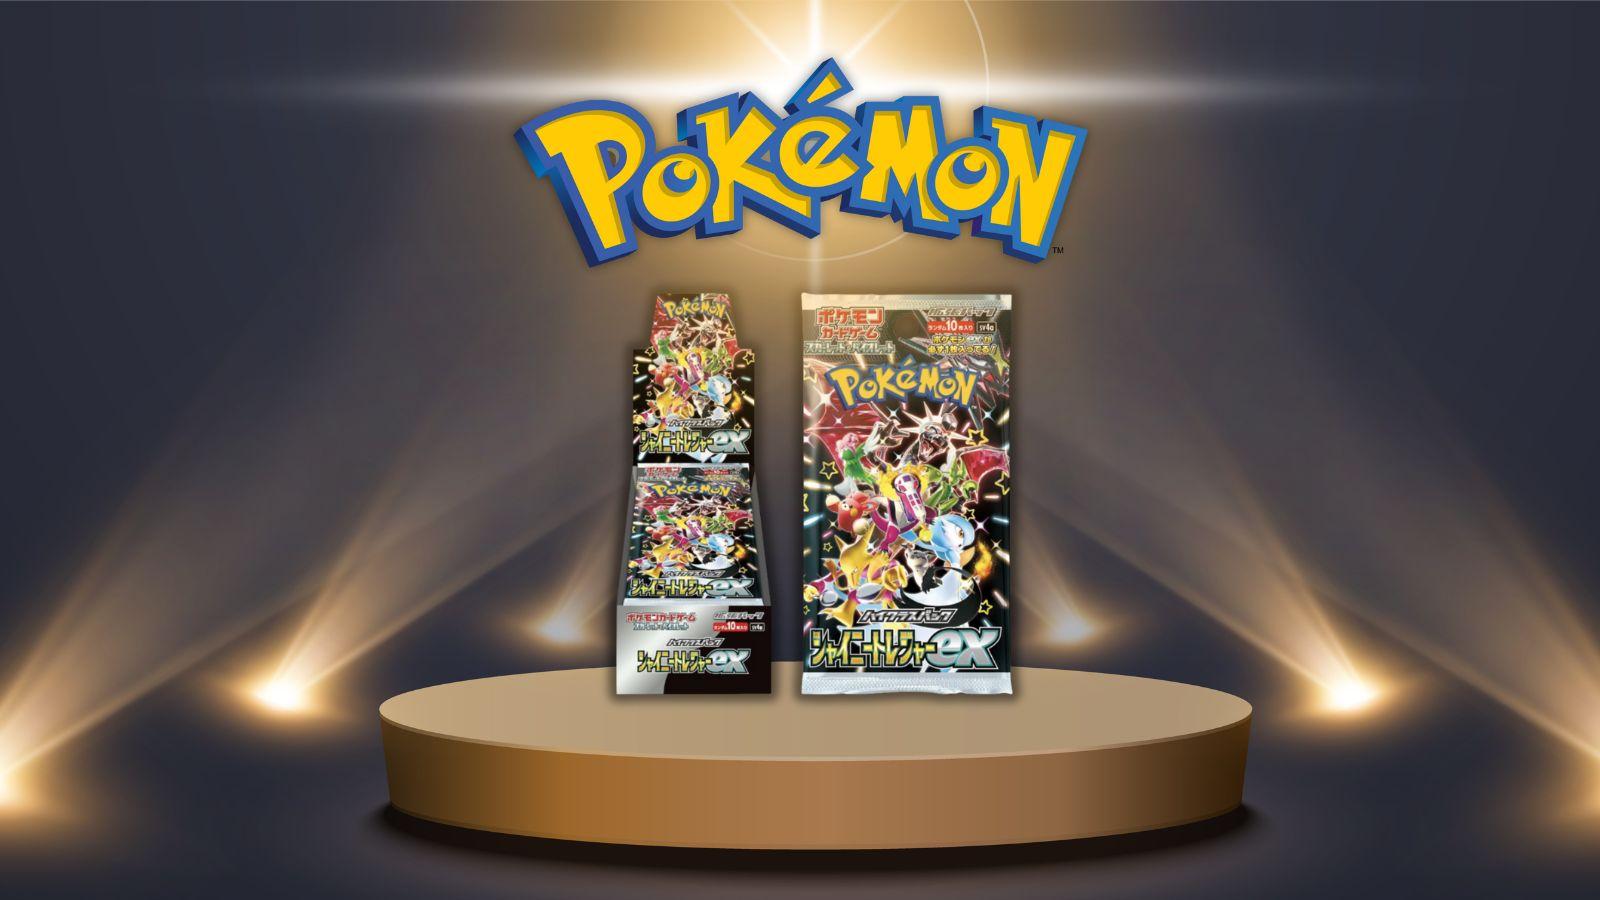 Pokemon Shiny Treasure Ex Booster box and packet products on a stand surrounded by spotlights